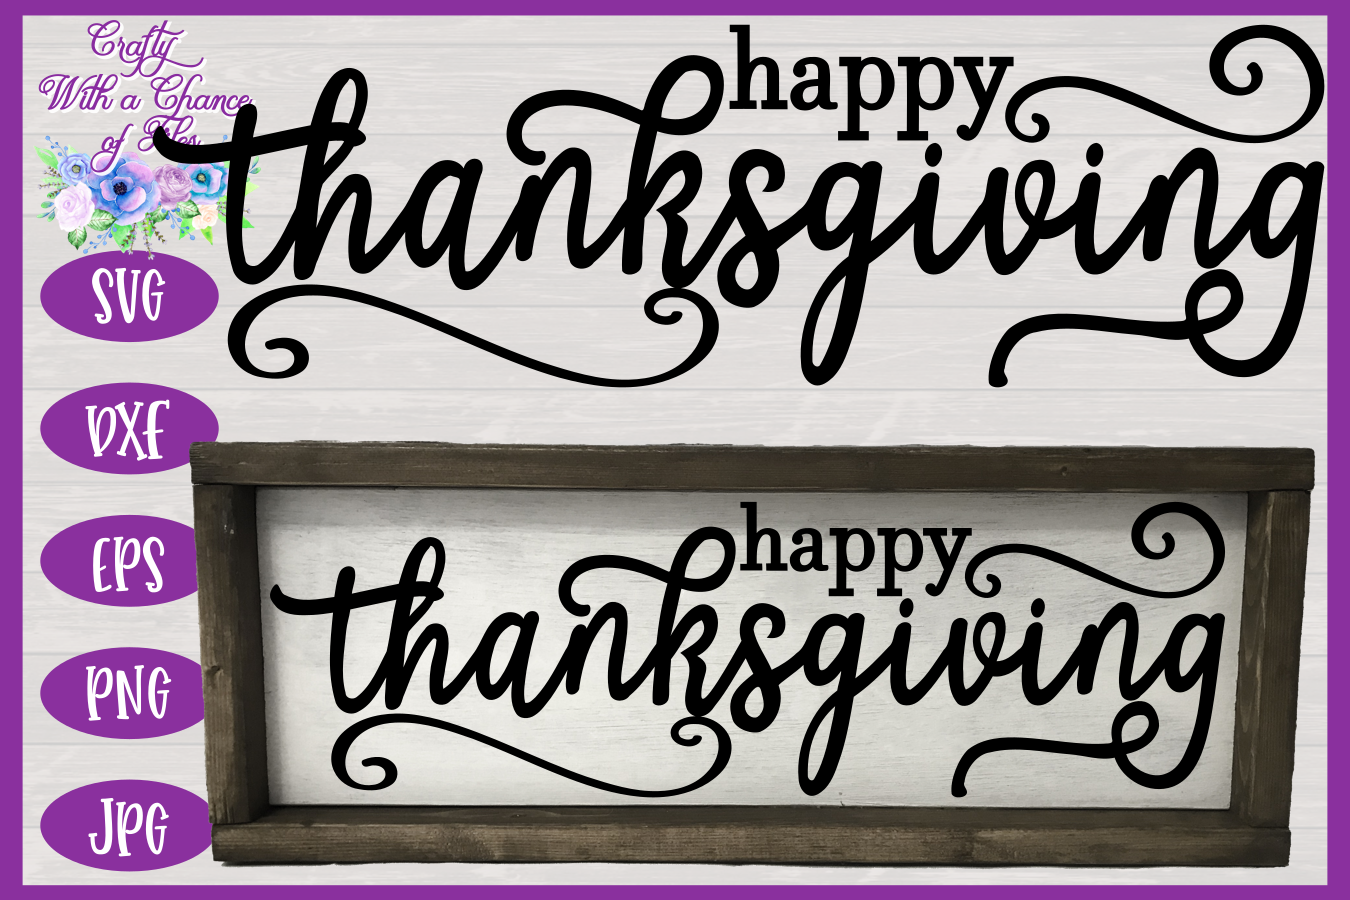 Happy Thanksgiving SVG | Fall SVG | Autumn SVG | Farmhouse Sign SVG By